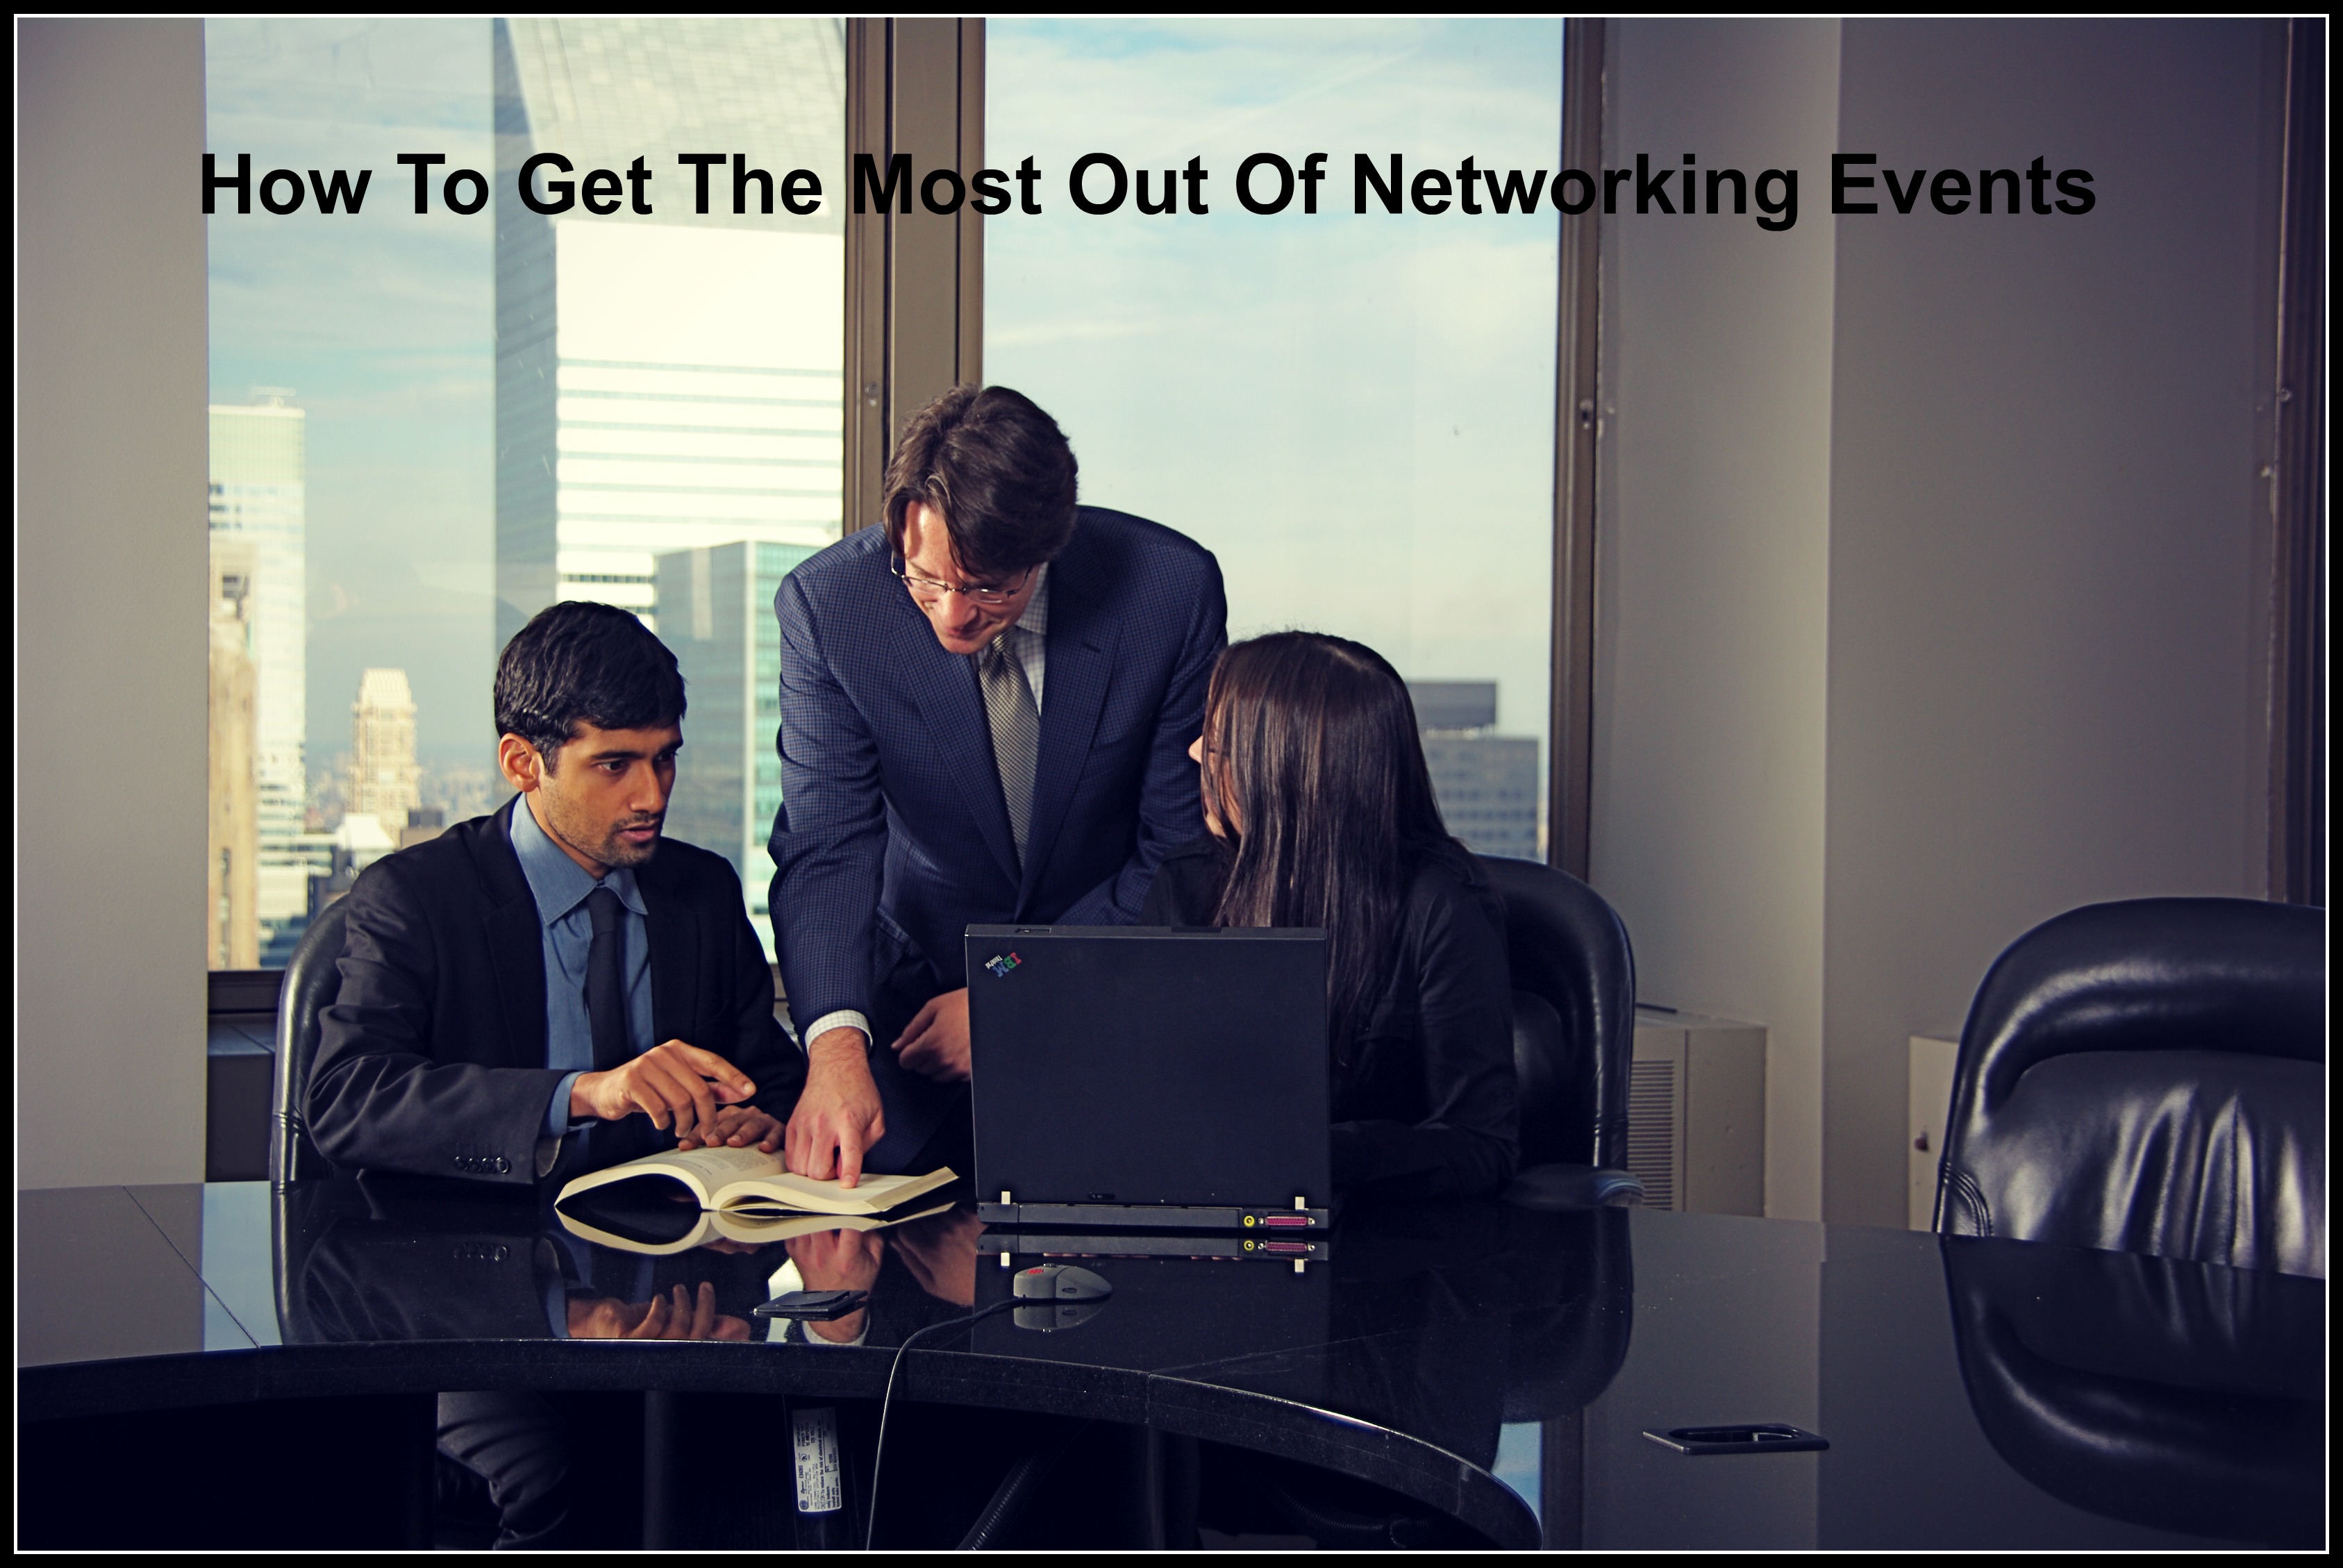 How To Get The Most Out Of Networking Events